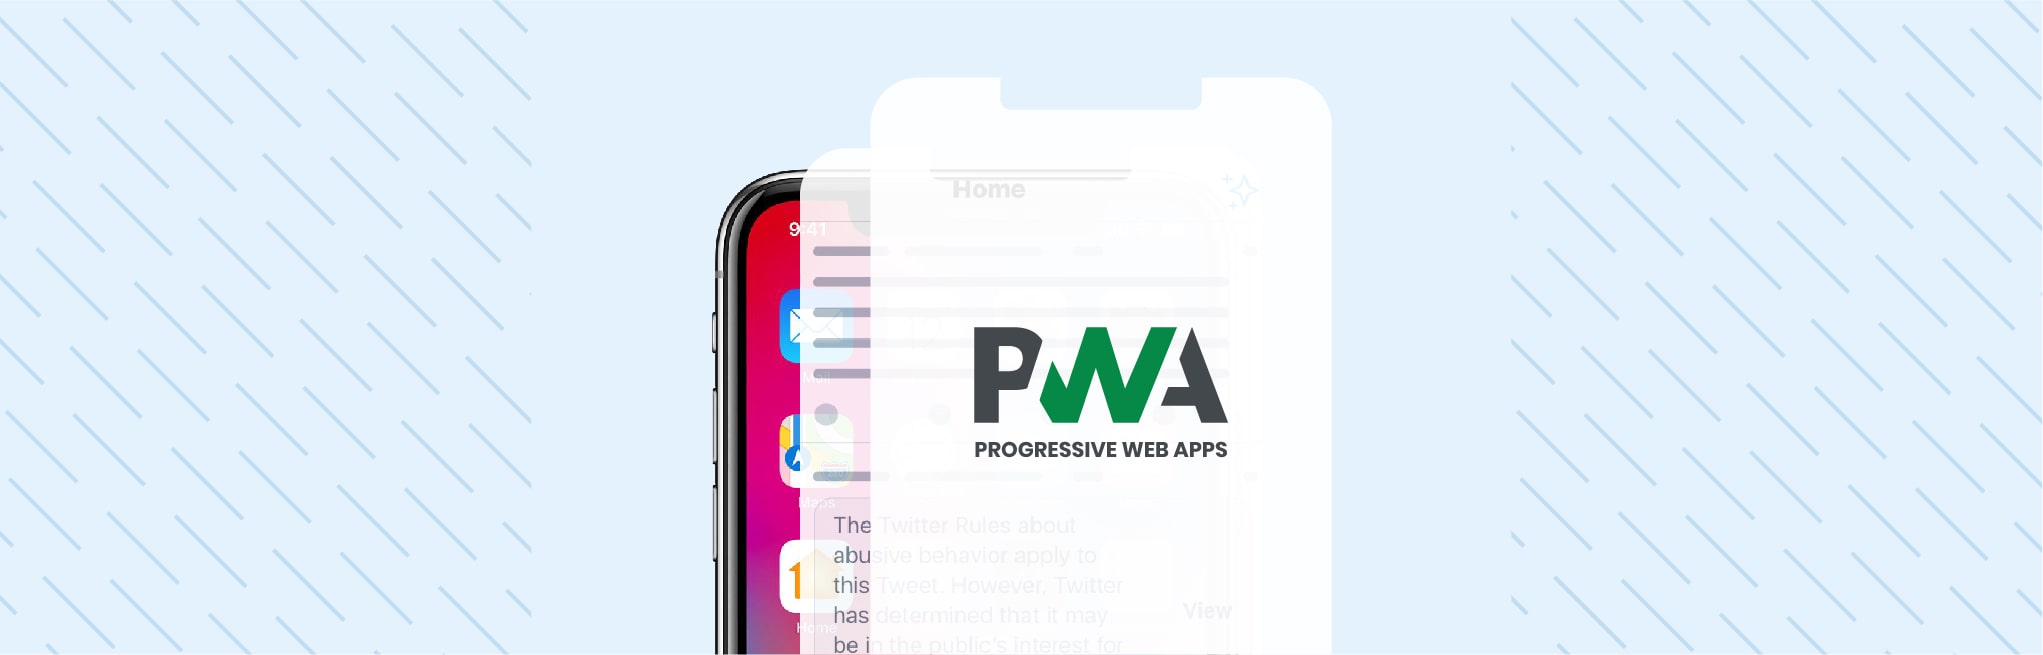 banner-iOS-Getting-Into-The-PWA-Space-Faster-Than-Ever-min